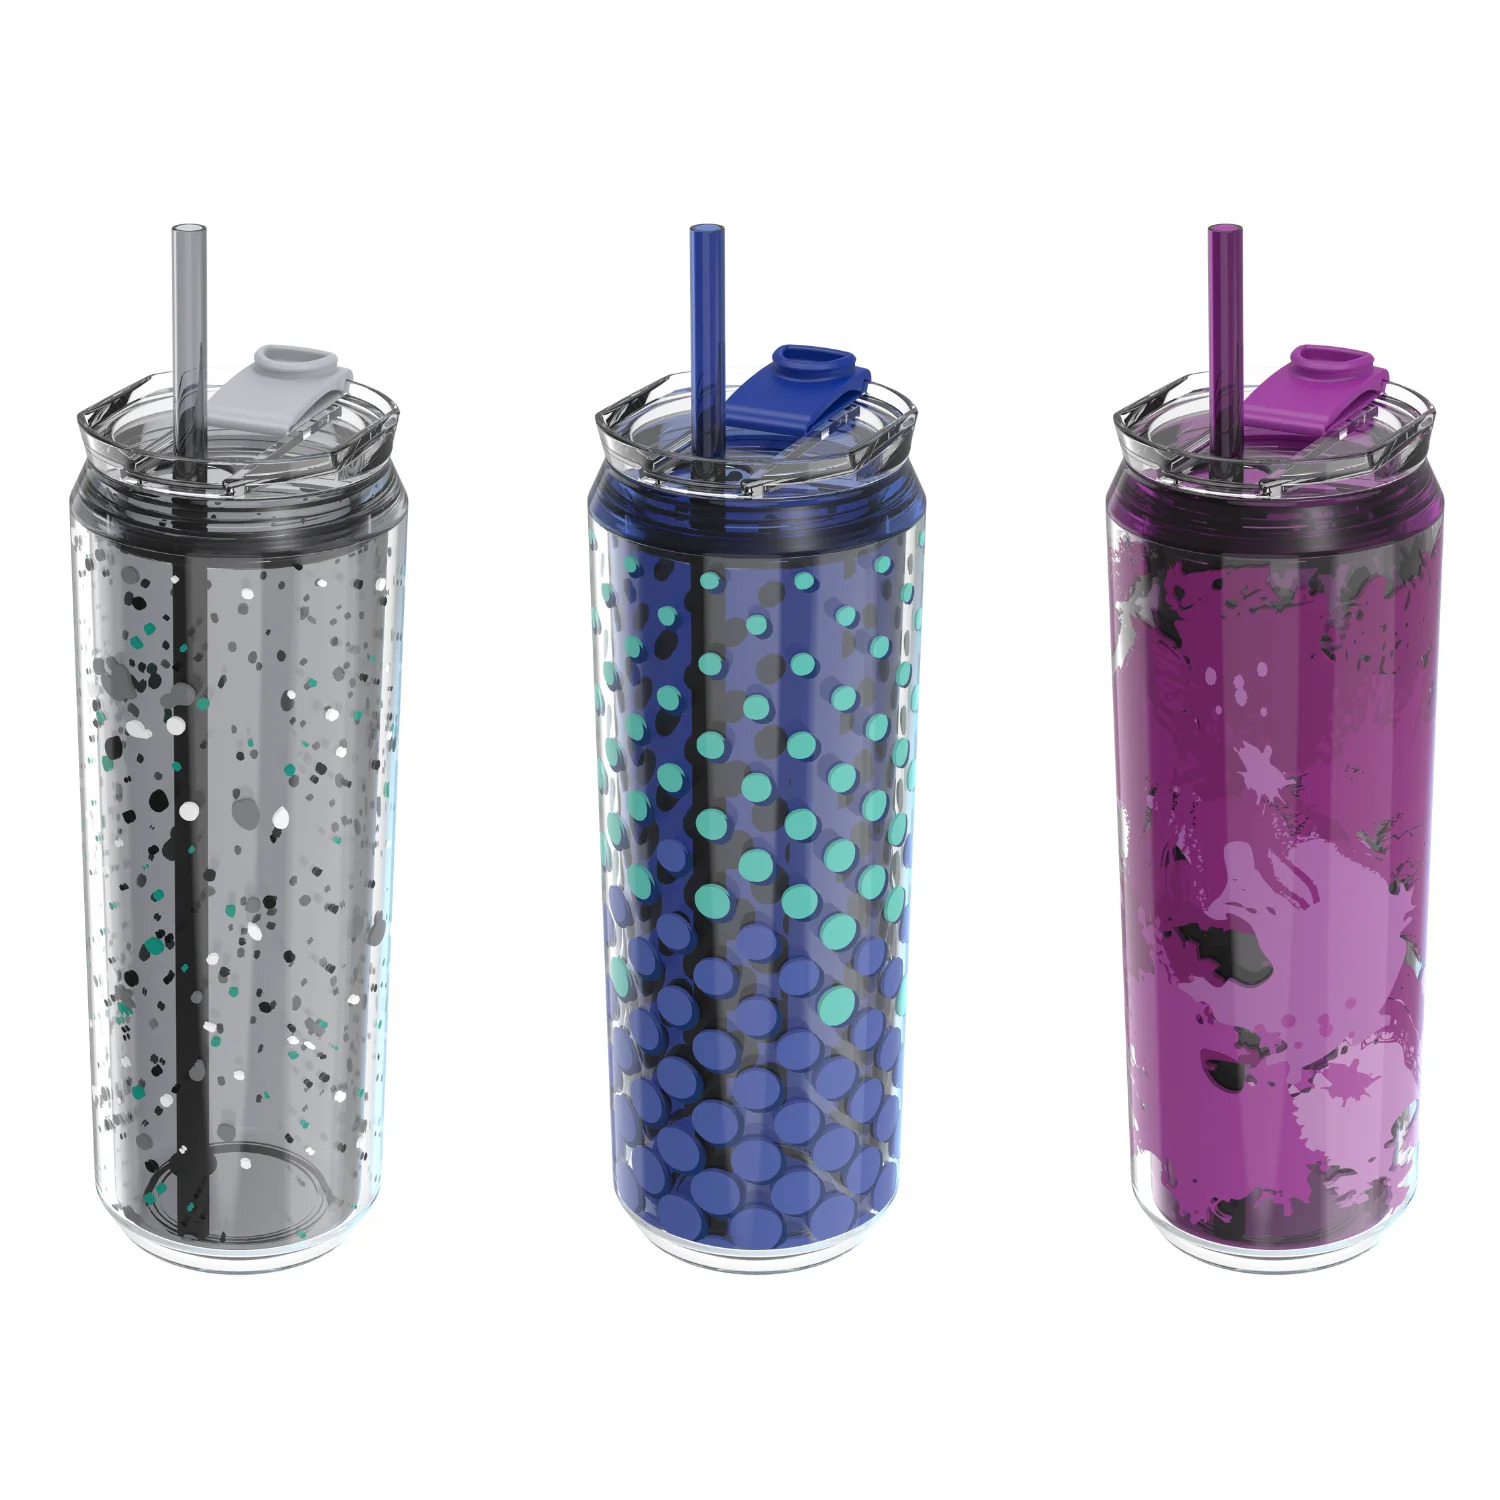 Cool Gear 3-Pack Modern Tumbler with Reusable Straw | Dishwasher Safe, Cup Holder Friendly, Spillproof, Double-Wall Insulated Travel Tumbler | Printed Variety Pack - image 1 of 4